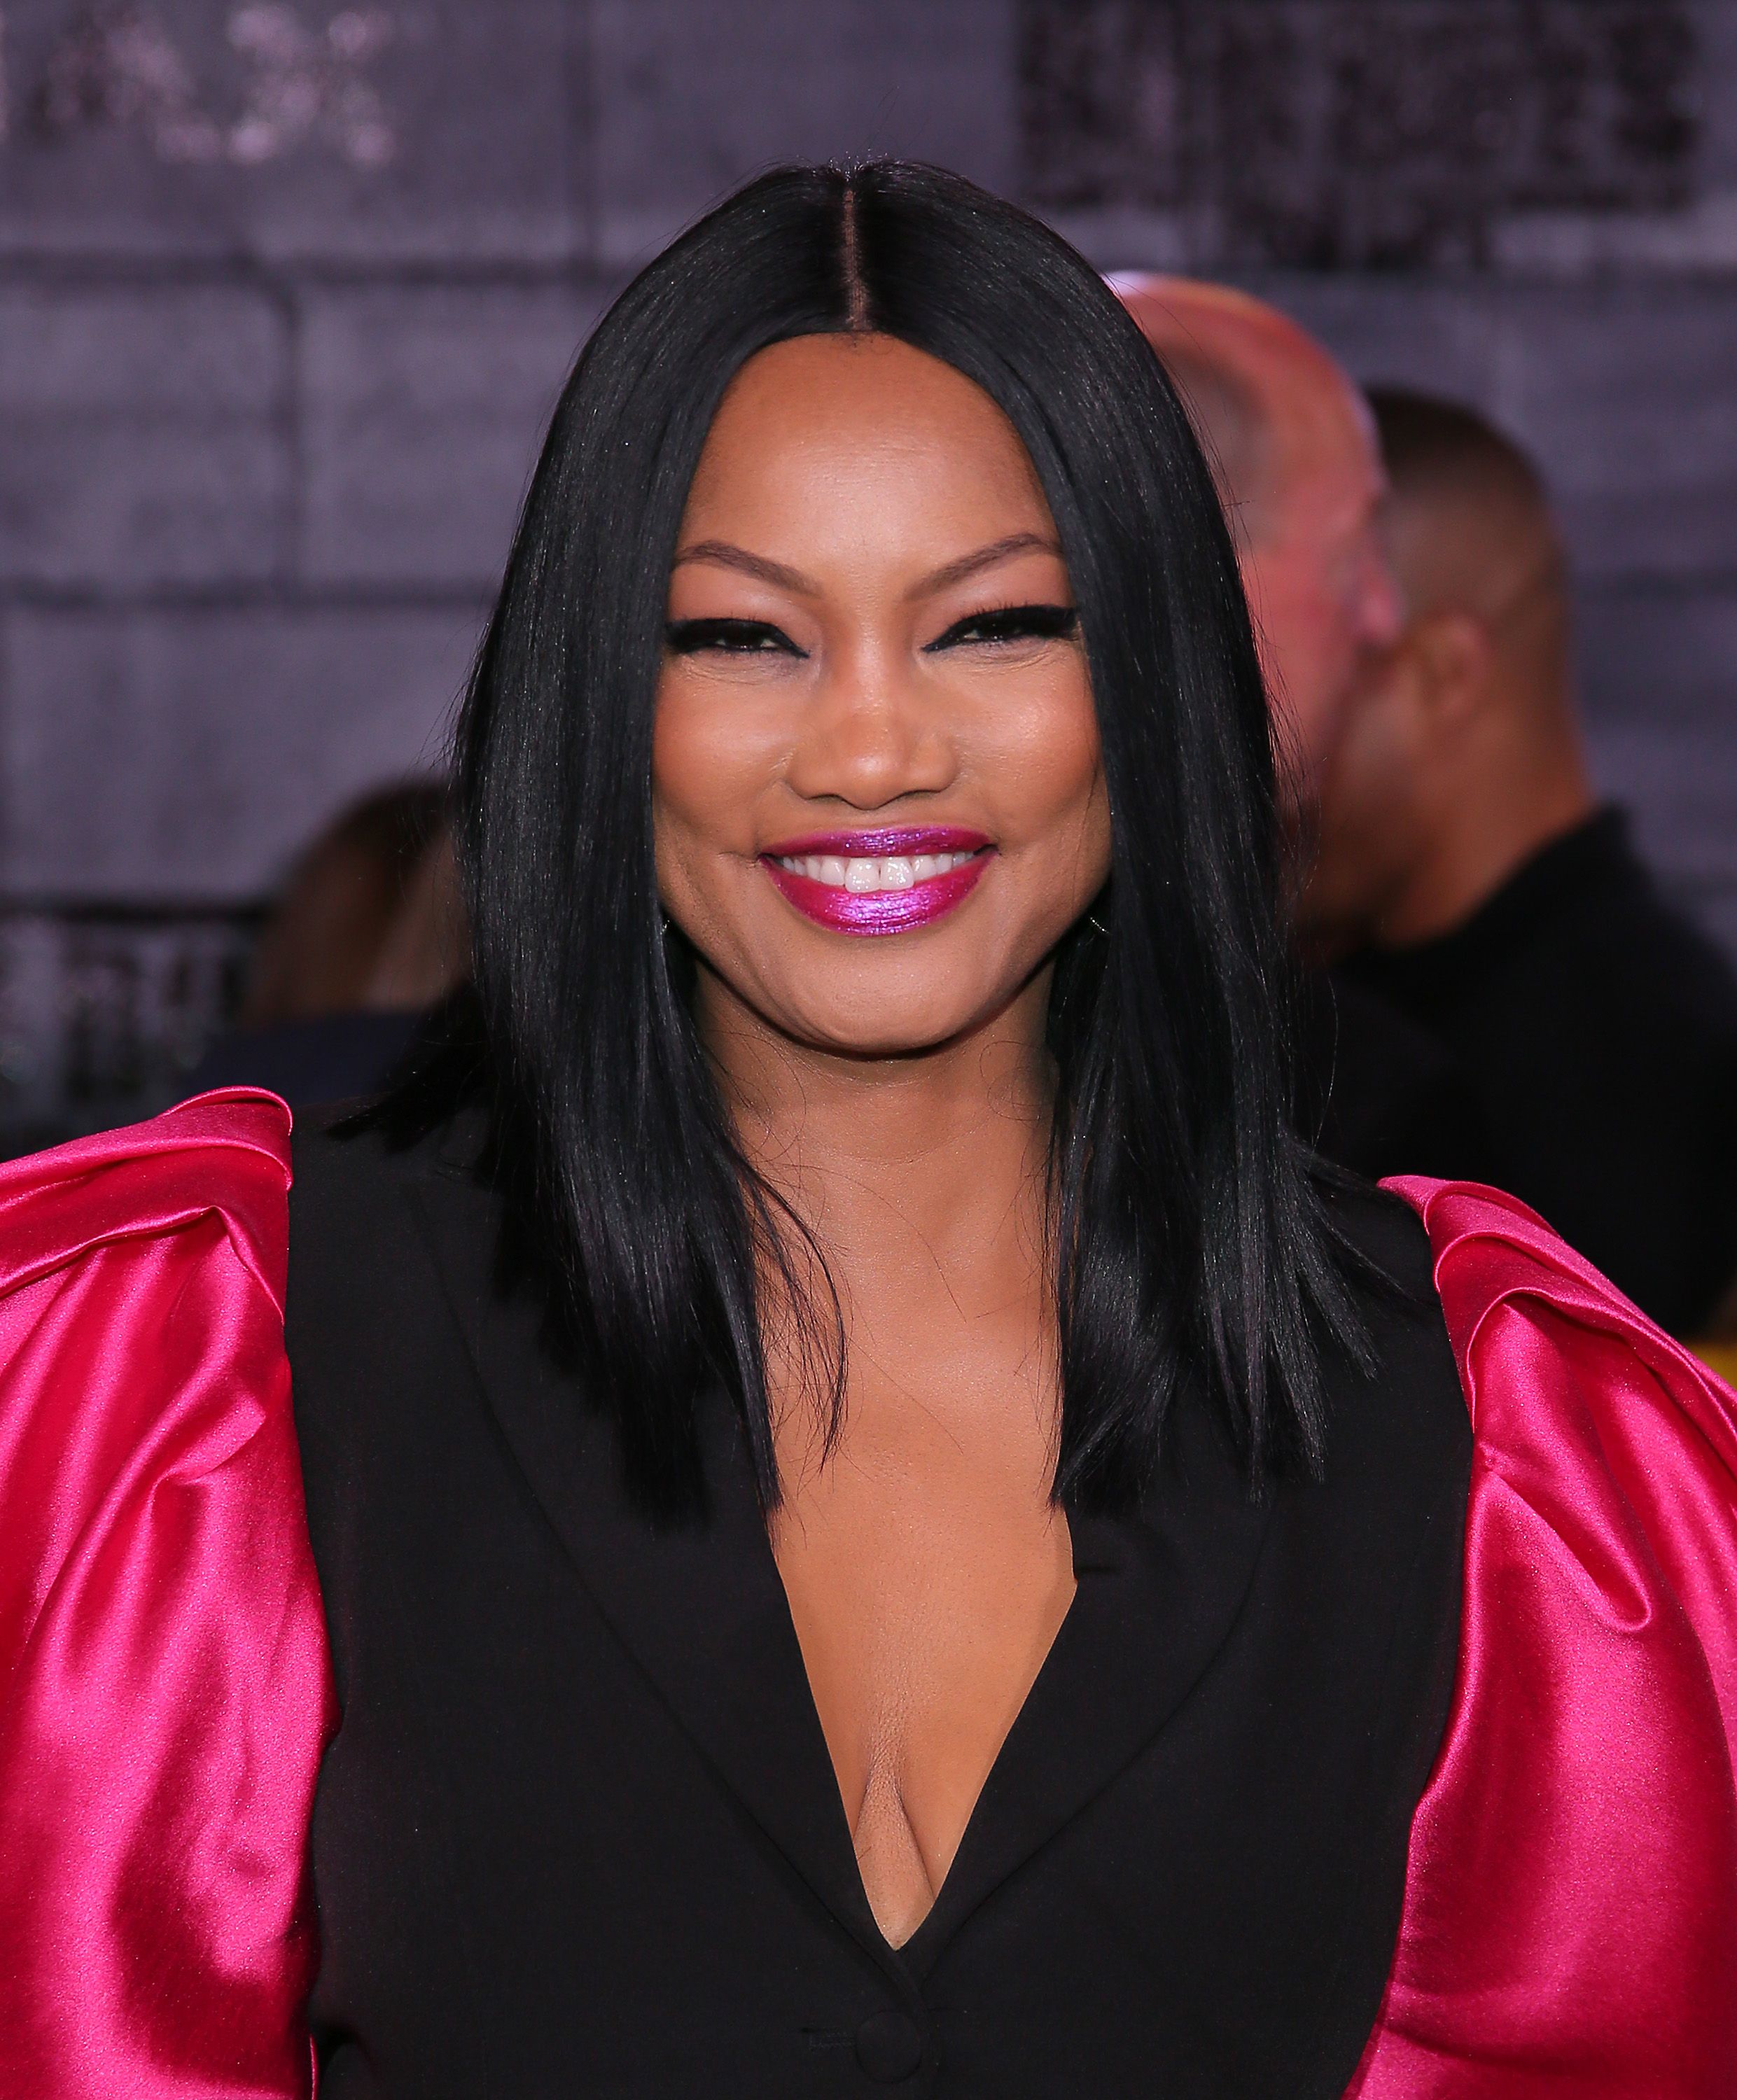 Garcelle Beauvais at the World Premiere of "Bad Boys for Life" at TCL Chinese Theater on January 14, 2020 in Hollywood, California. | Photo: Getty Images